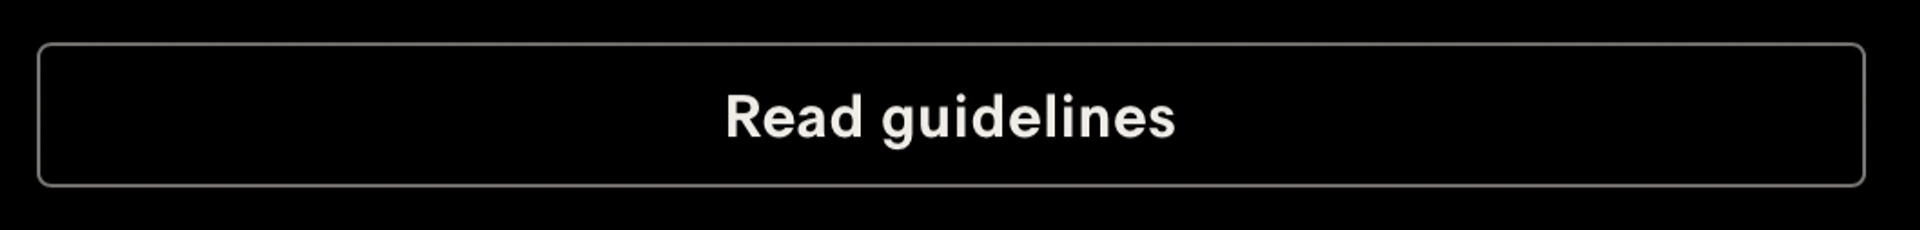 read guidelines button